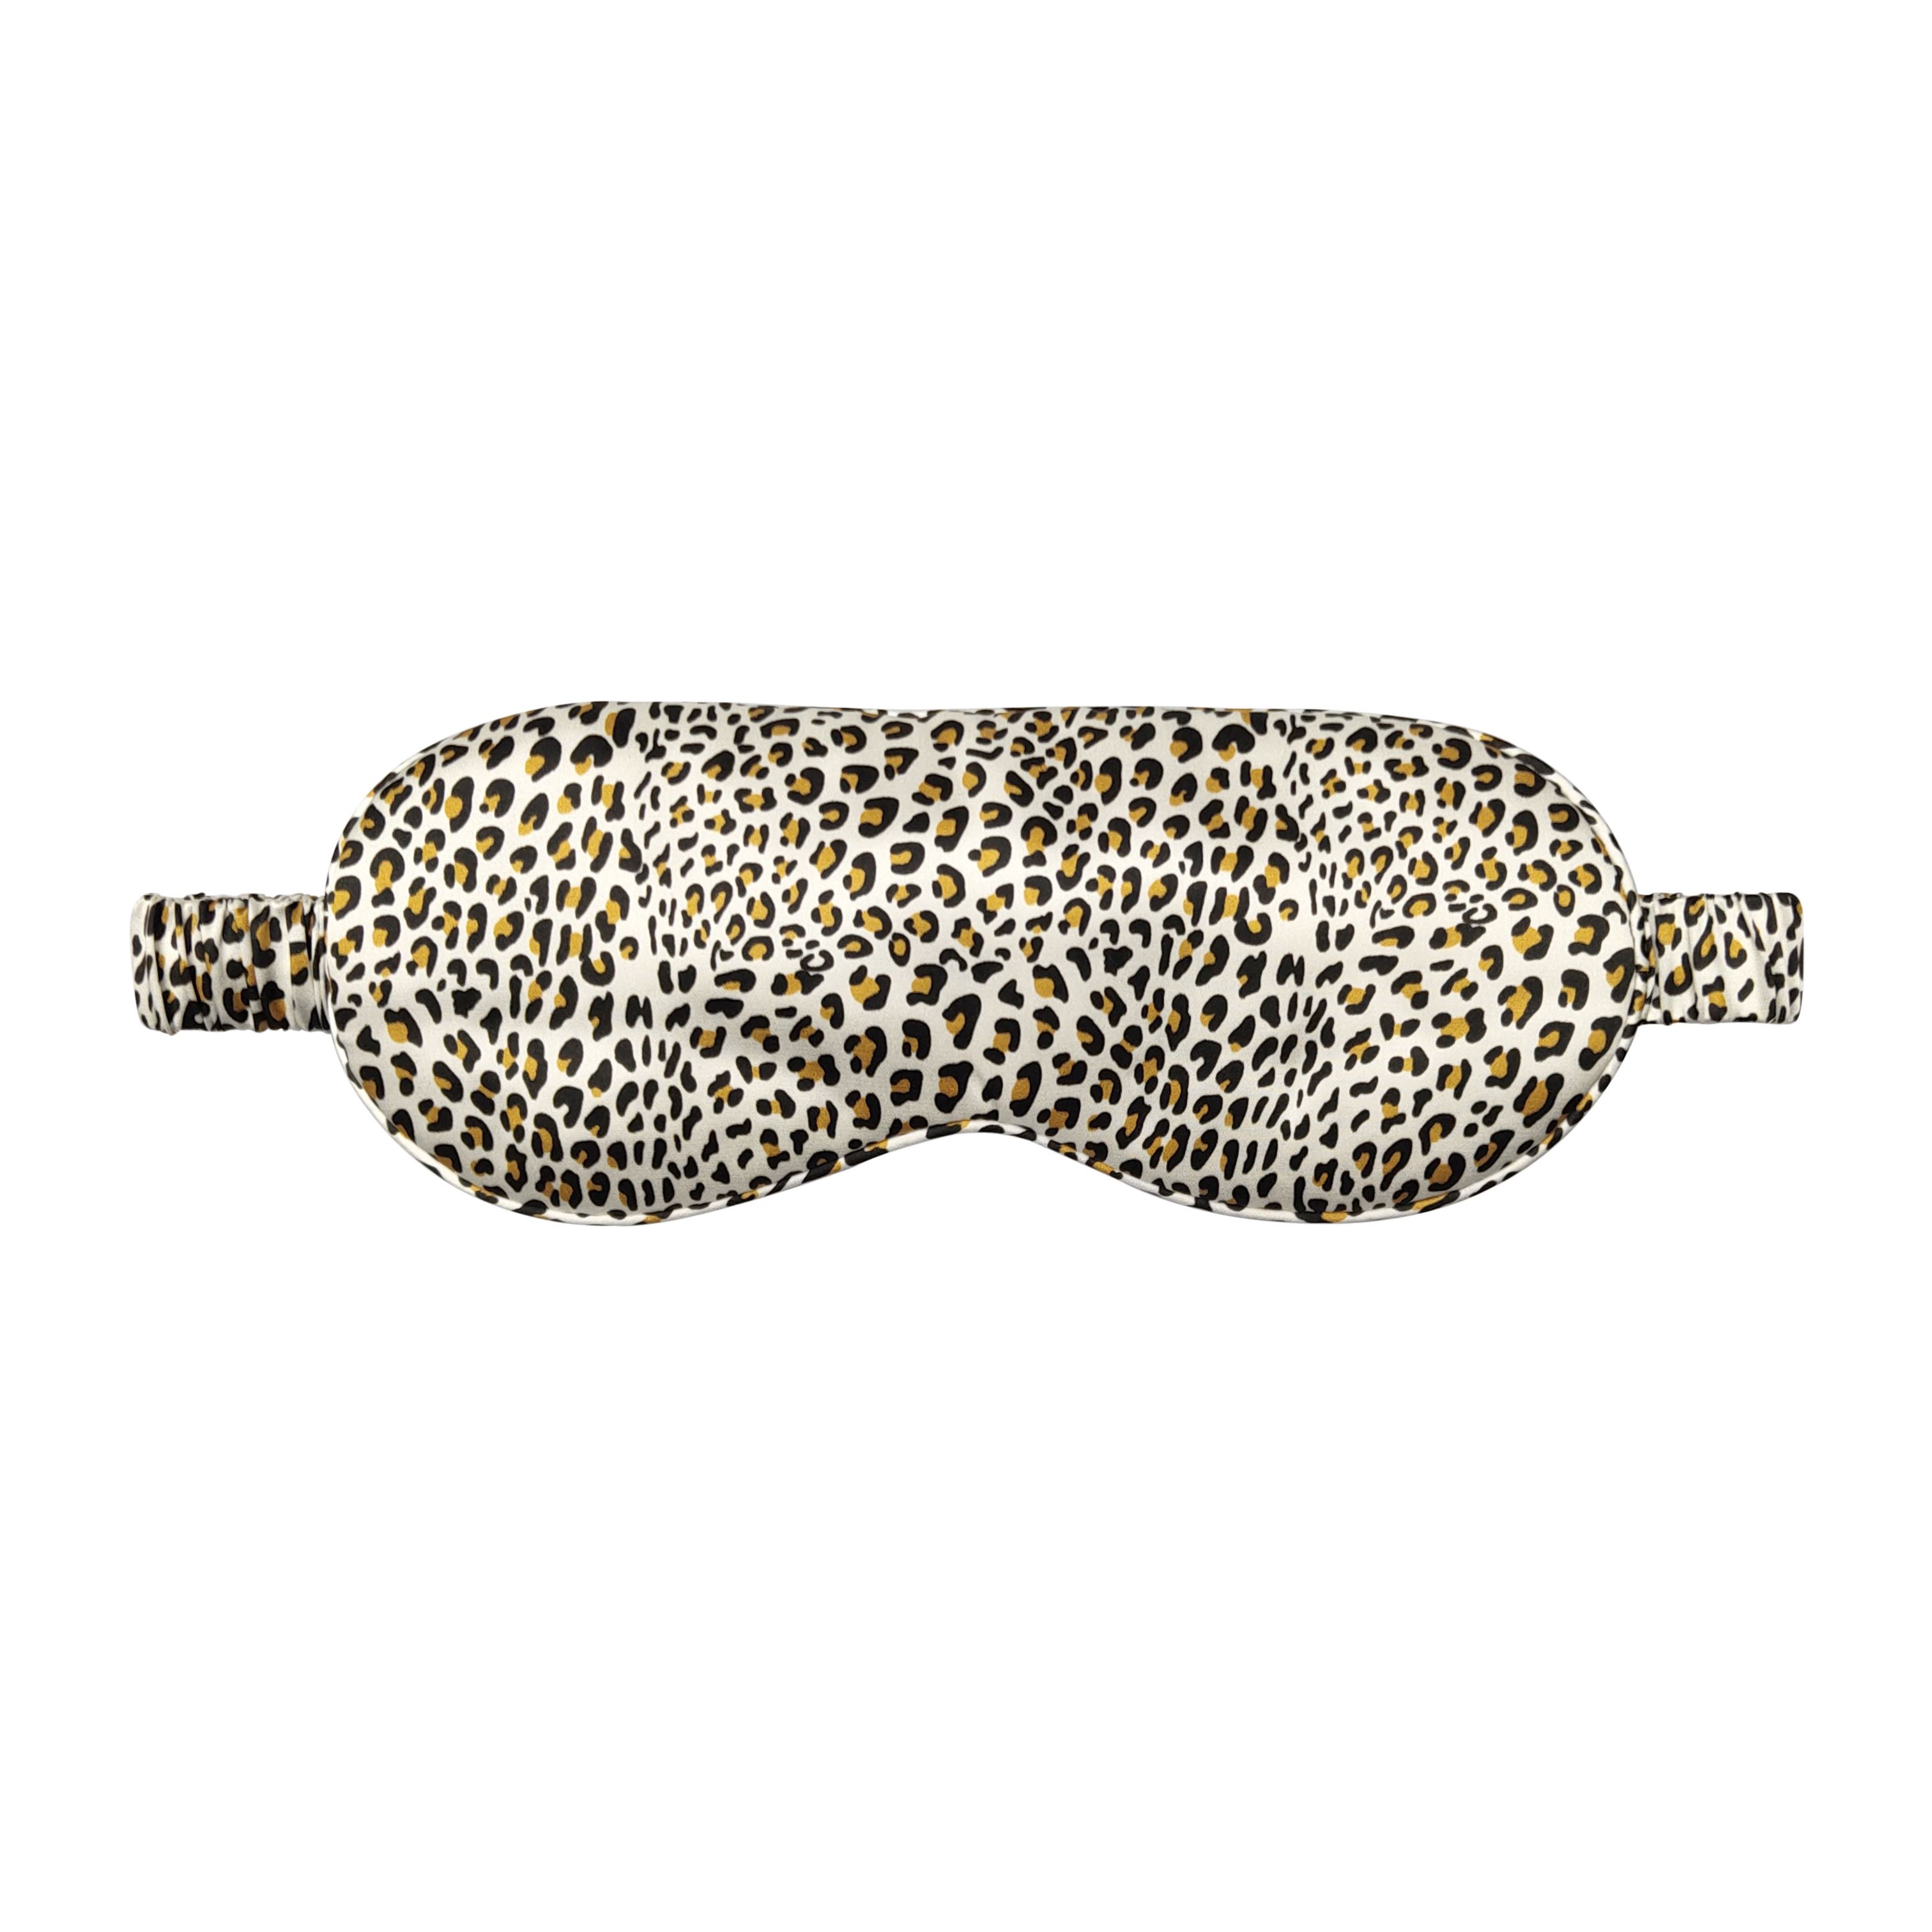 Custom and Wholesale Leopard Pattern Print Pure Mulberry Silk Eyemask Set for Promotion